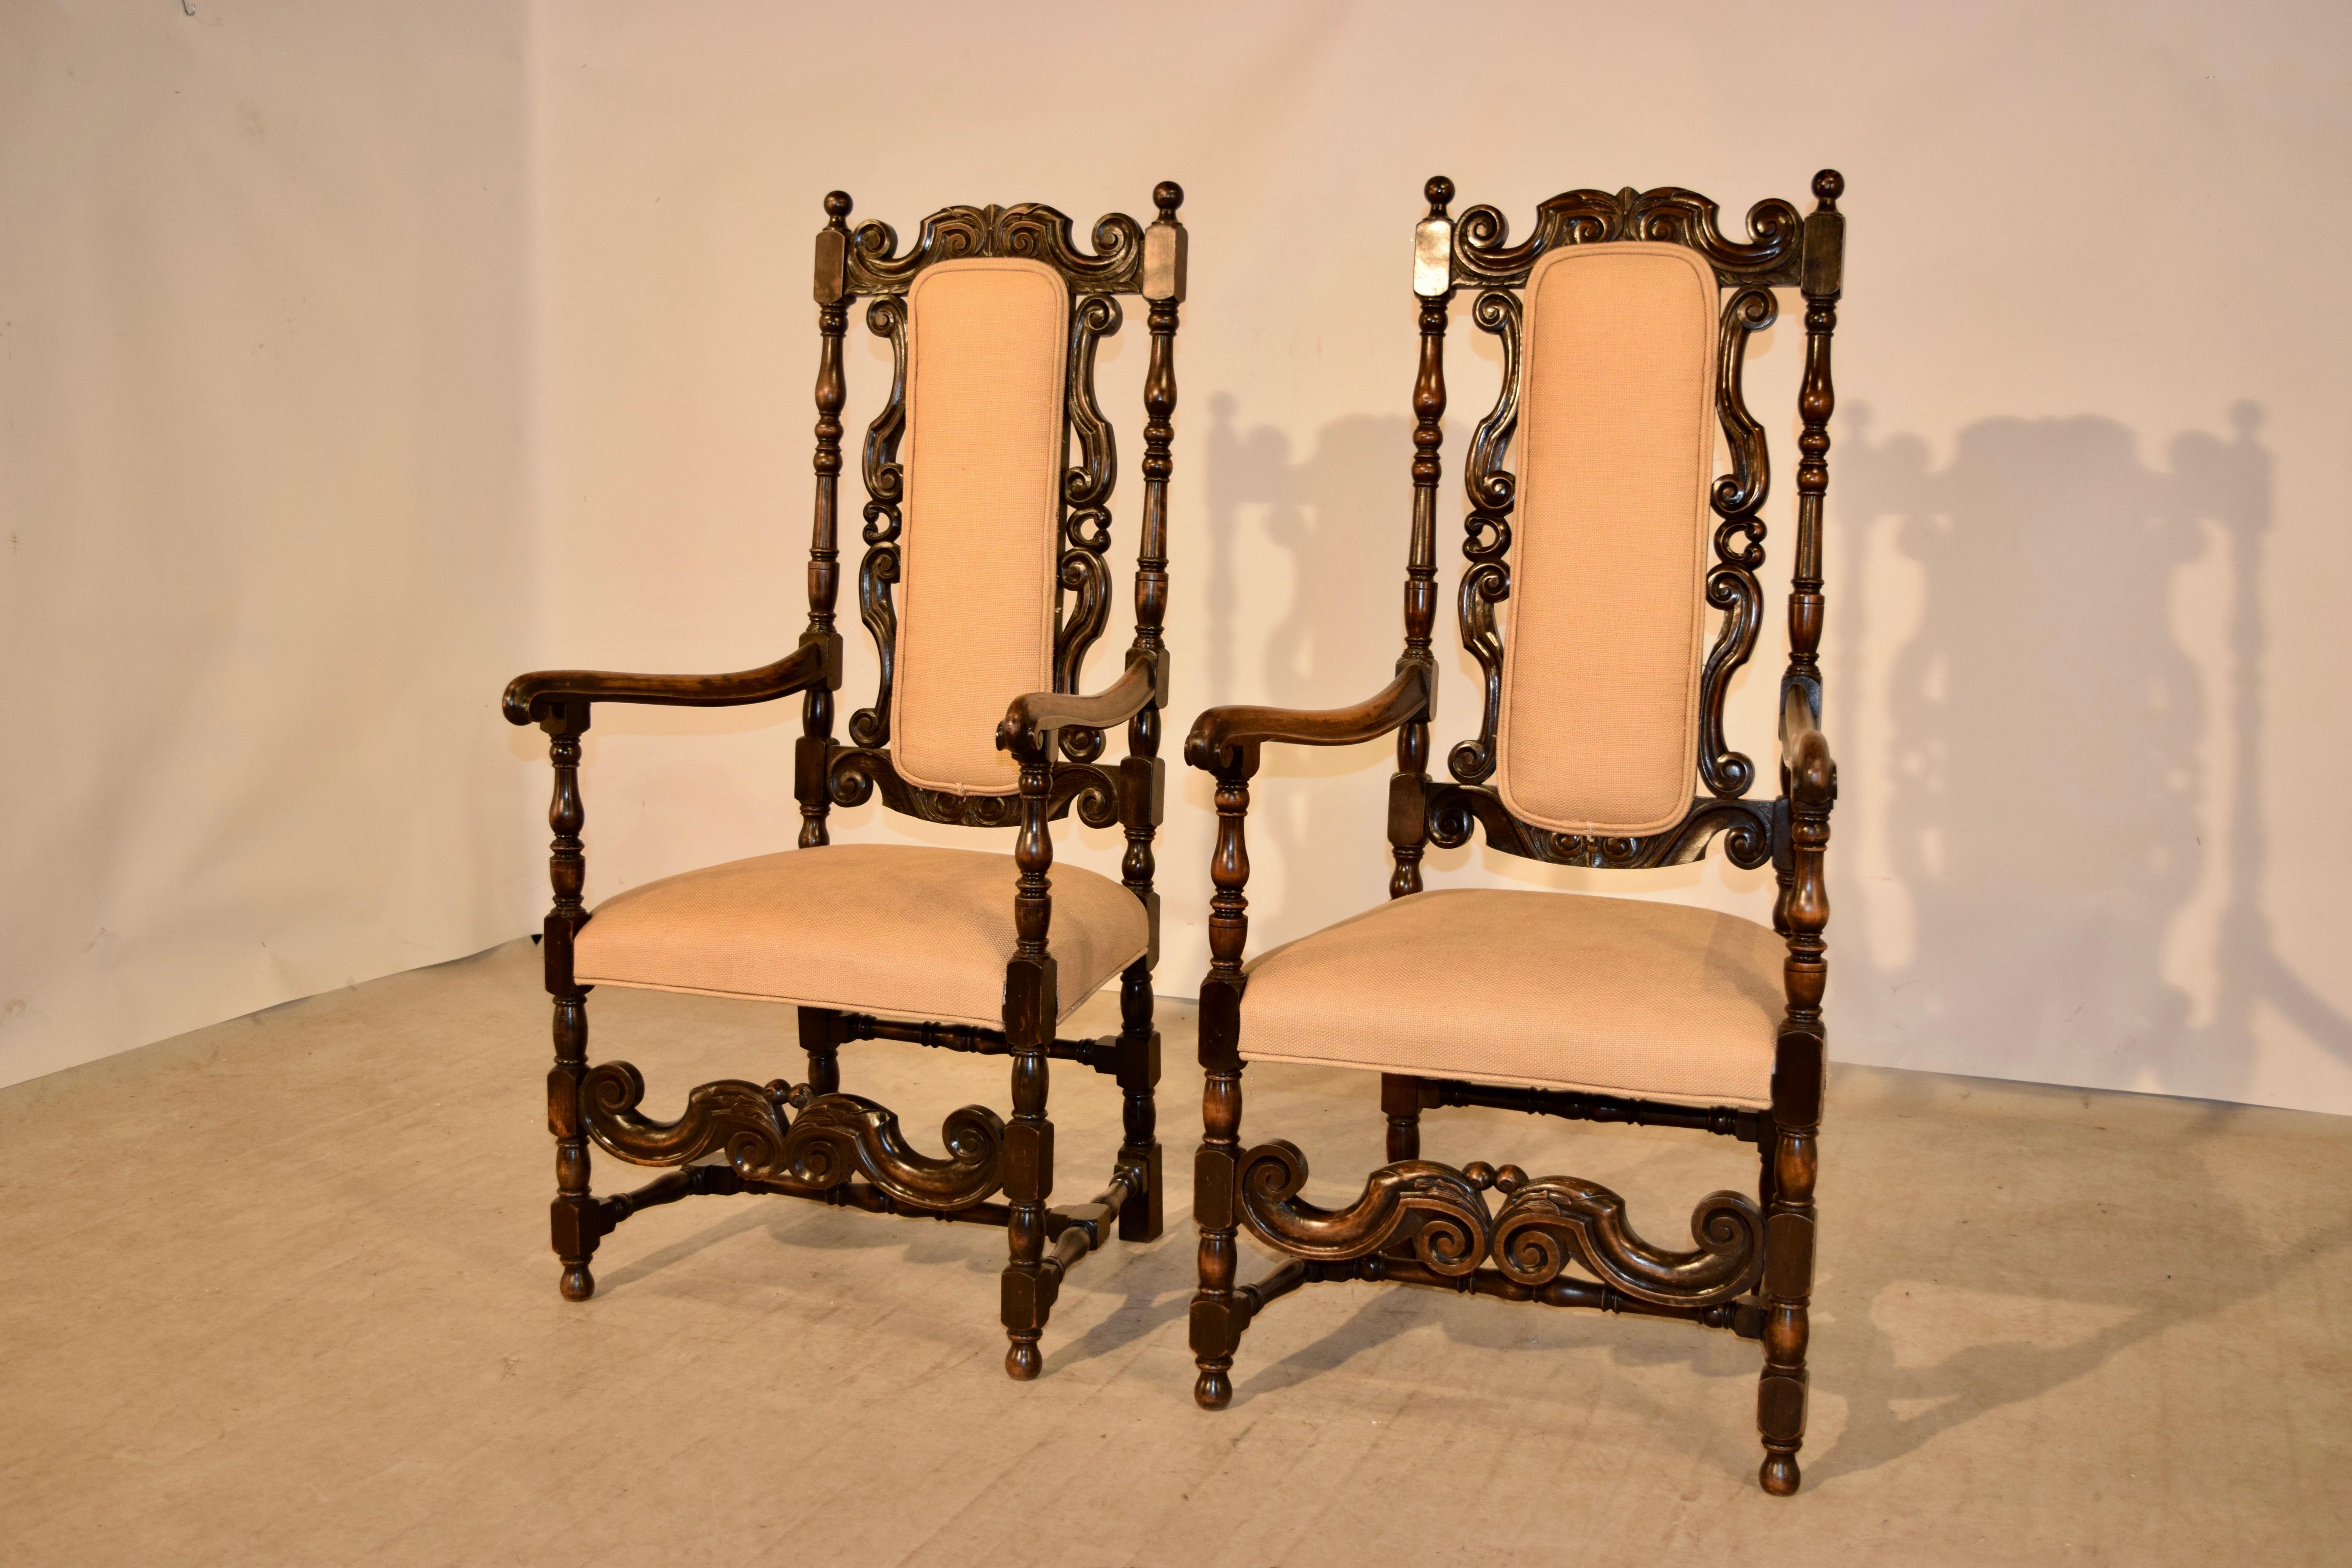 Pair of 19th century oak hall chairs from England. They have wonderfully hand carved backs with hand turned frames. We have had the seats and backs newly upholstered in linen.